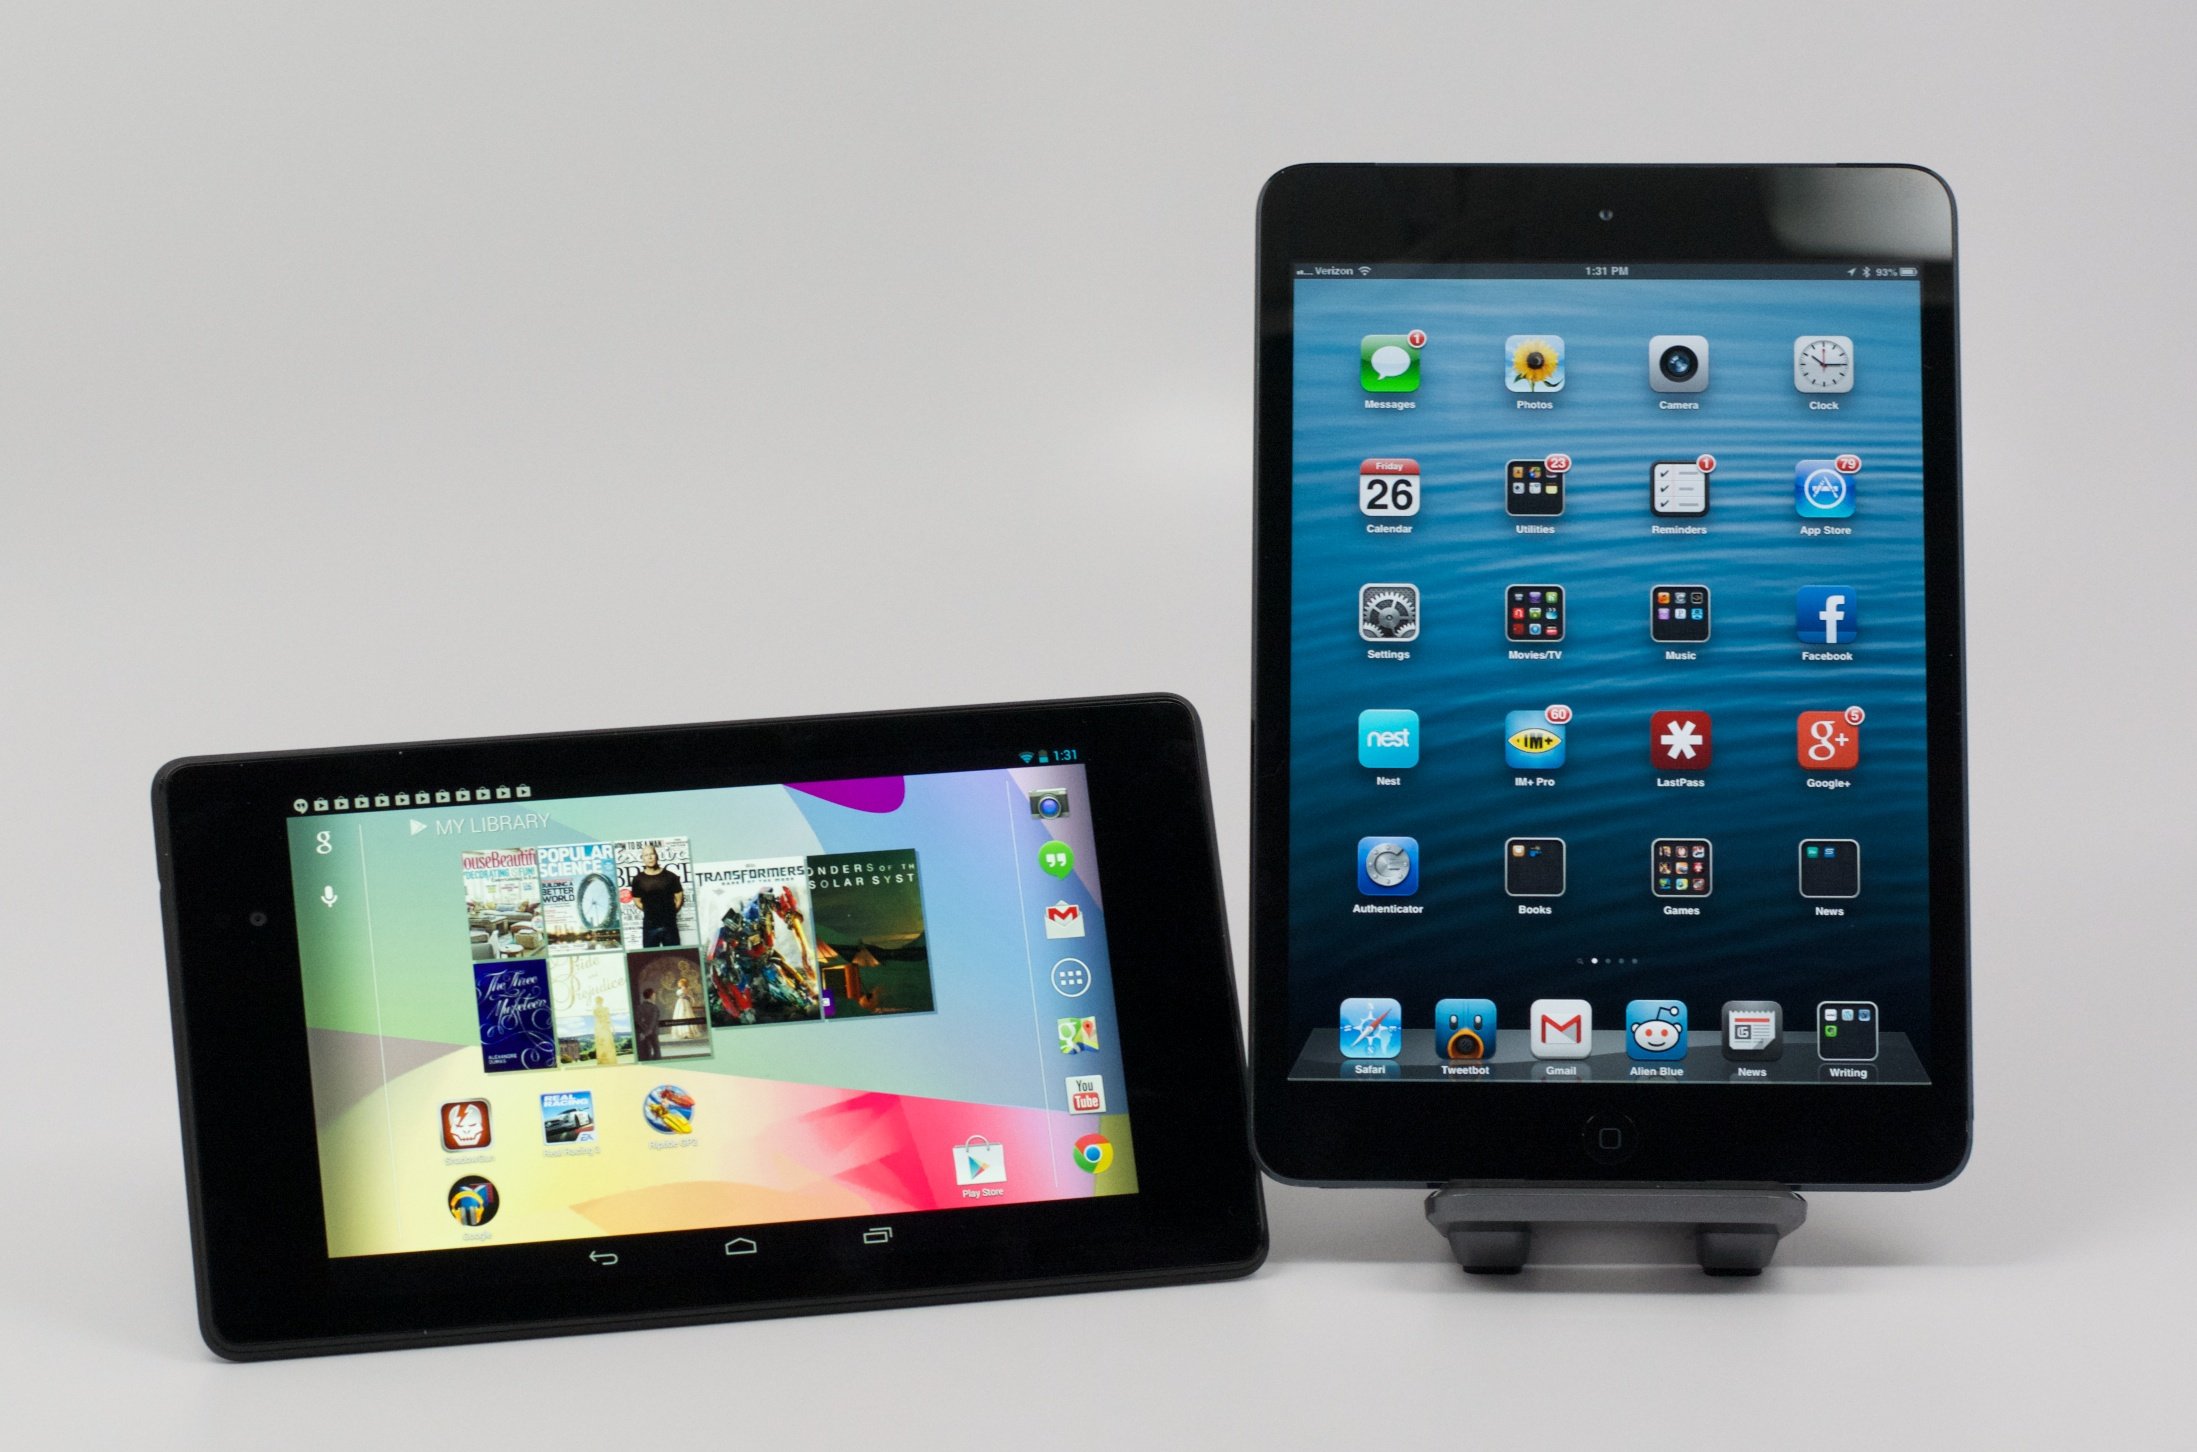 The iPad mini 2 release date, complete with a Retina Display could arrive in 2013 as Apple pushes to compete with the new Nexus 7.